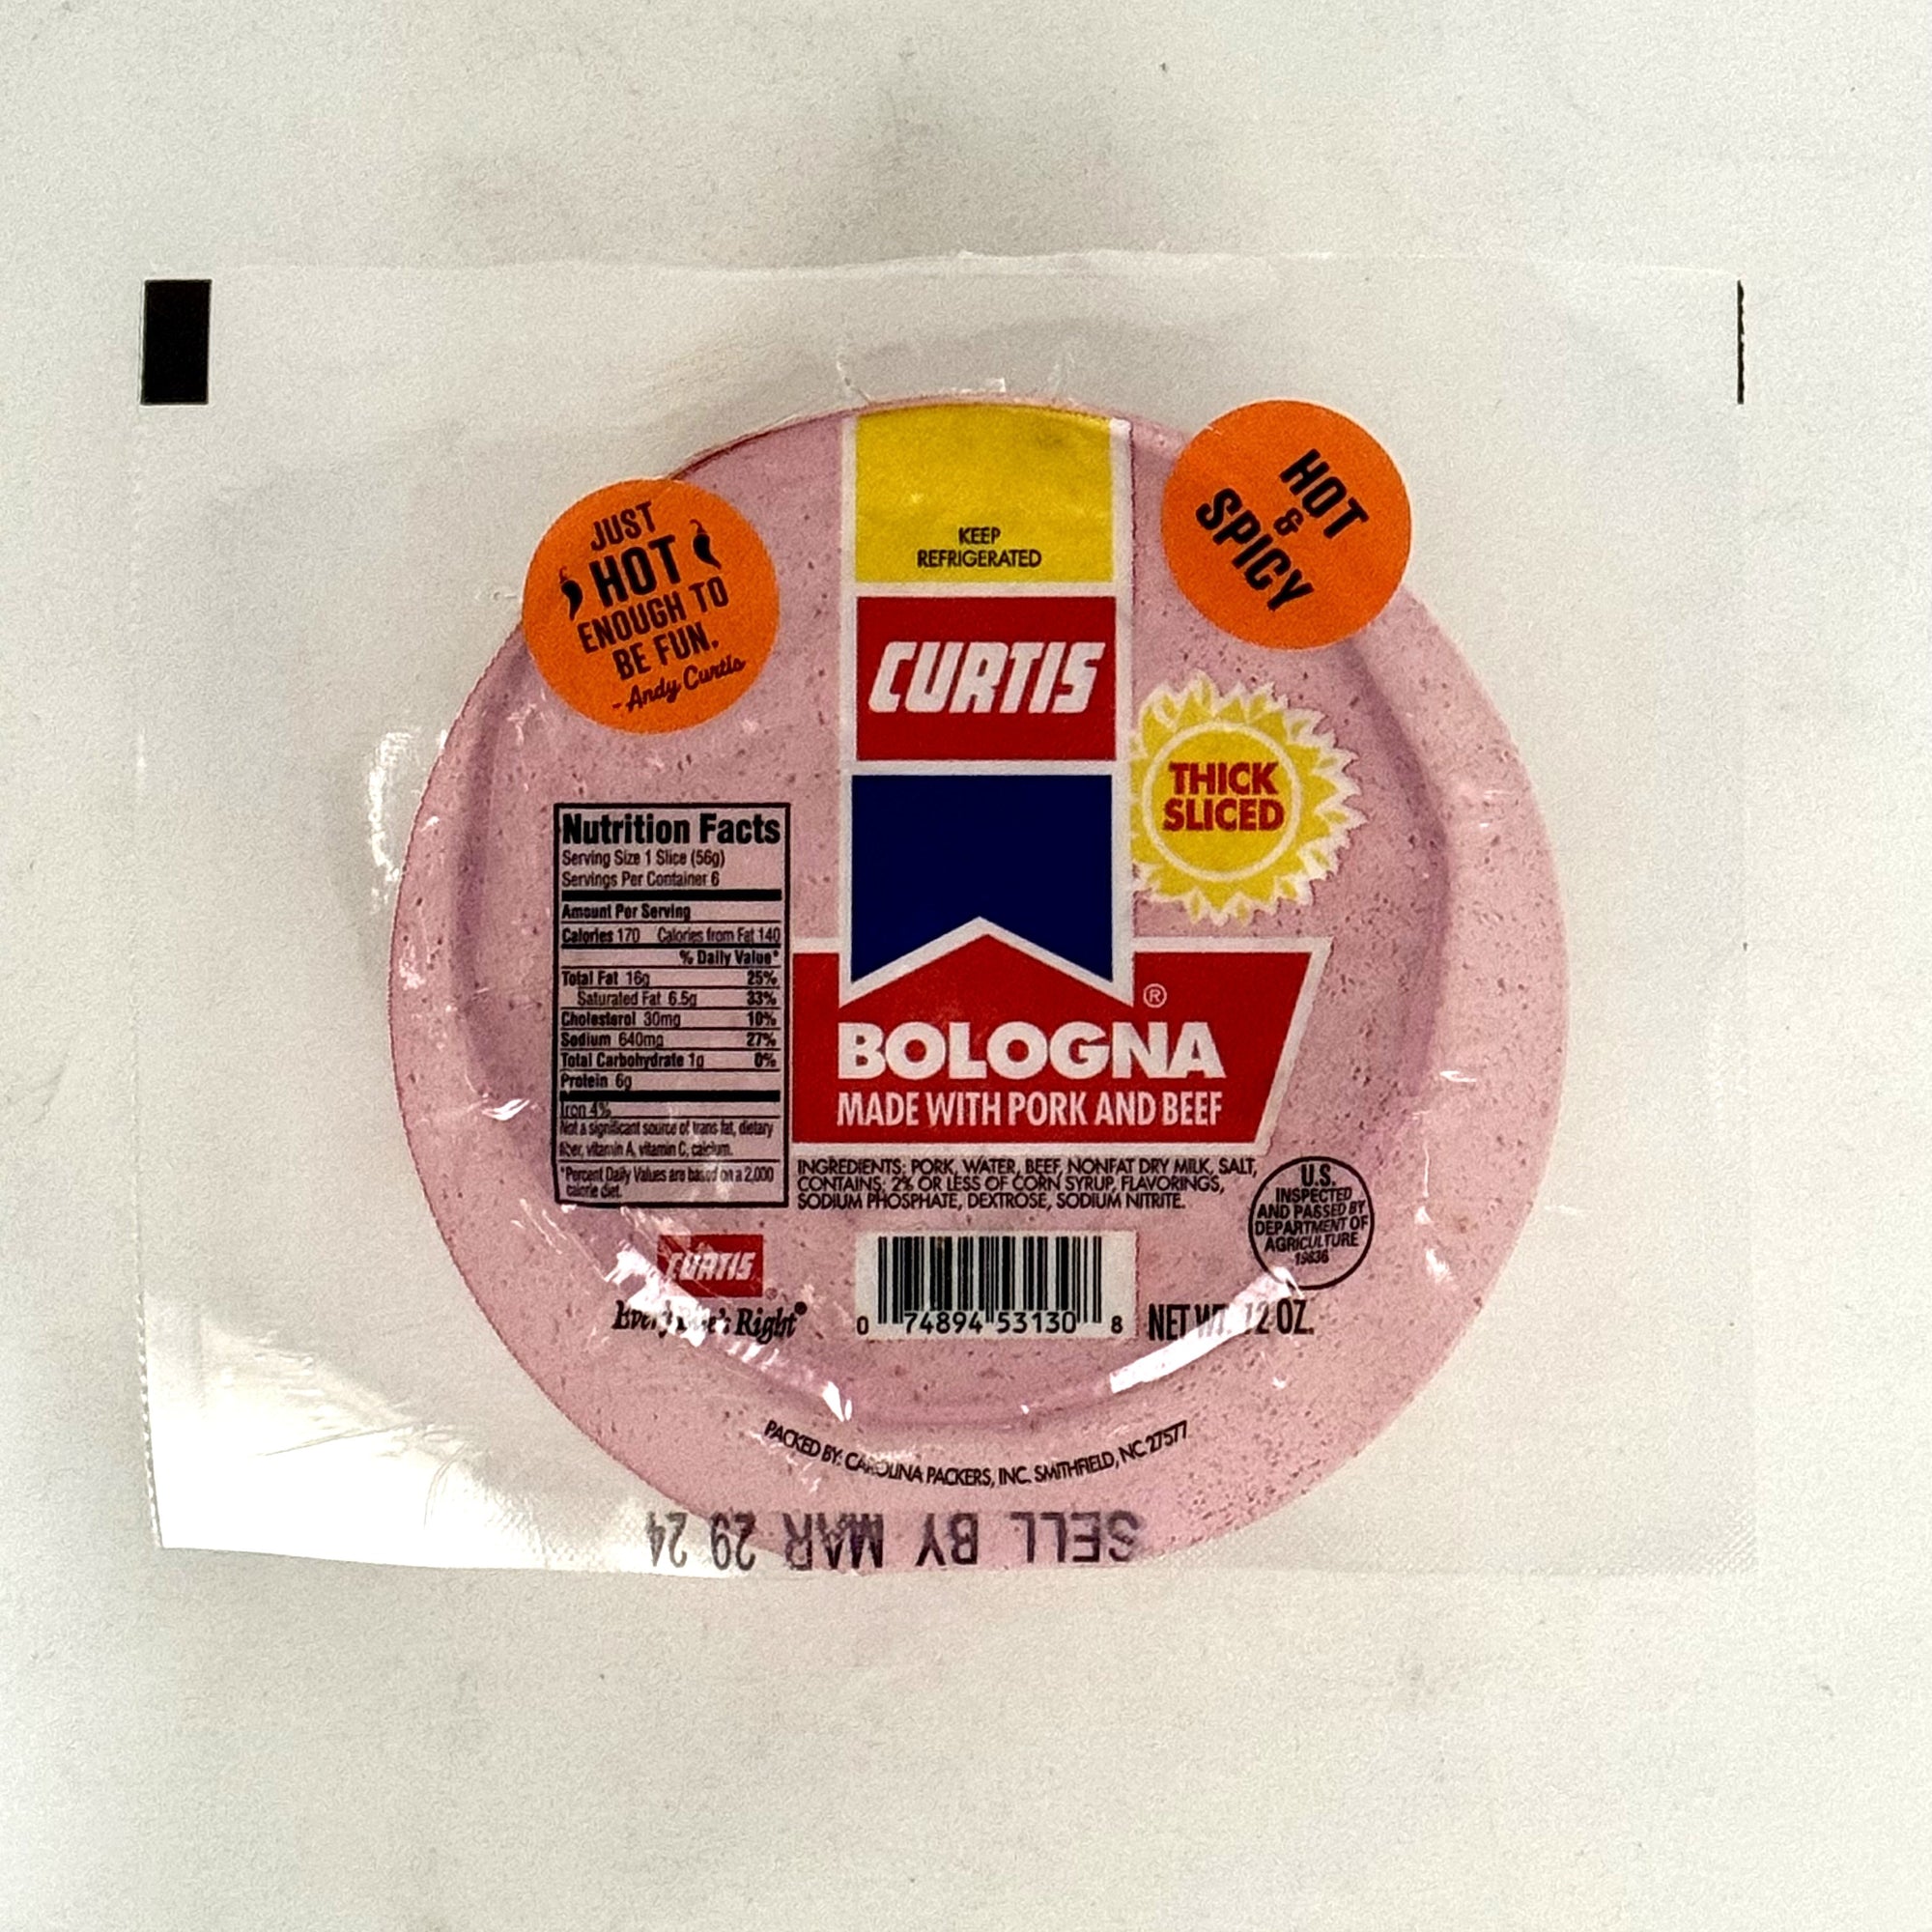 Curtis 12 oz. Hot and Spicy Bologna (5 - packages)